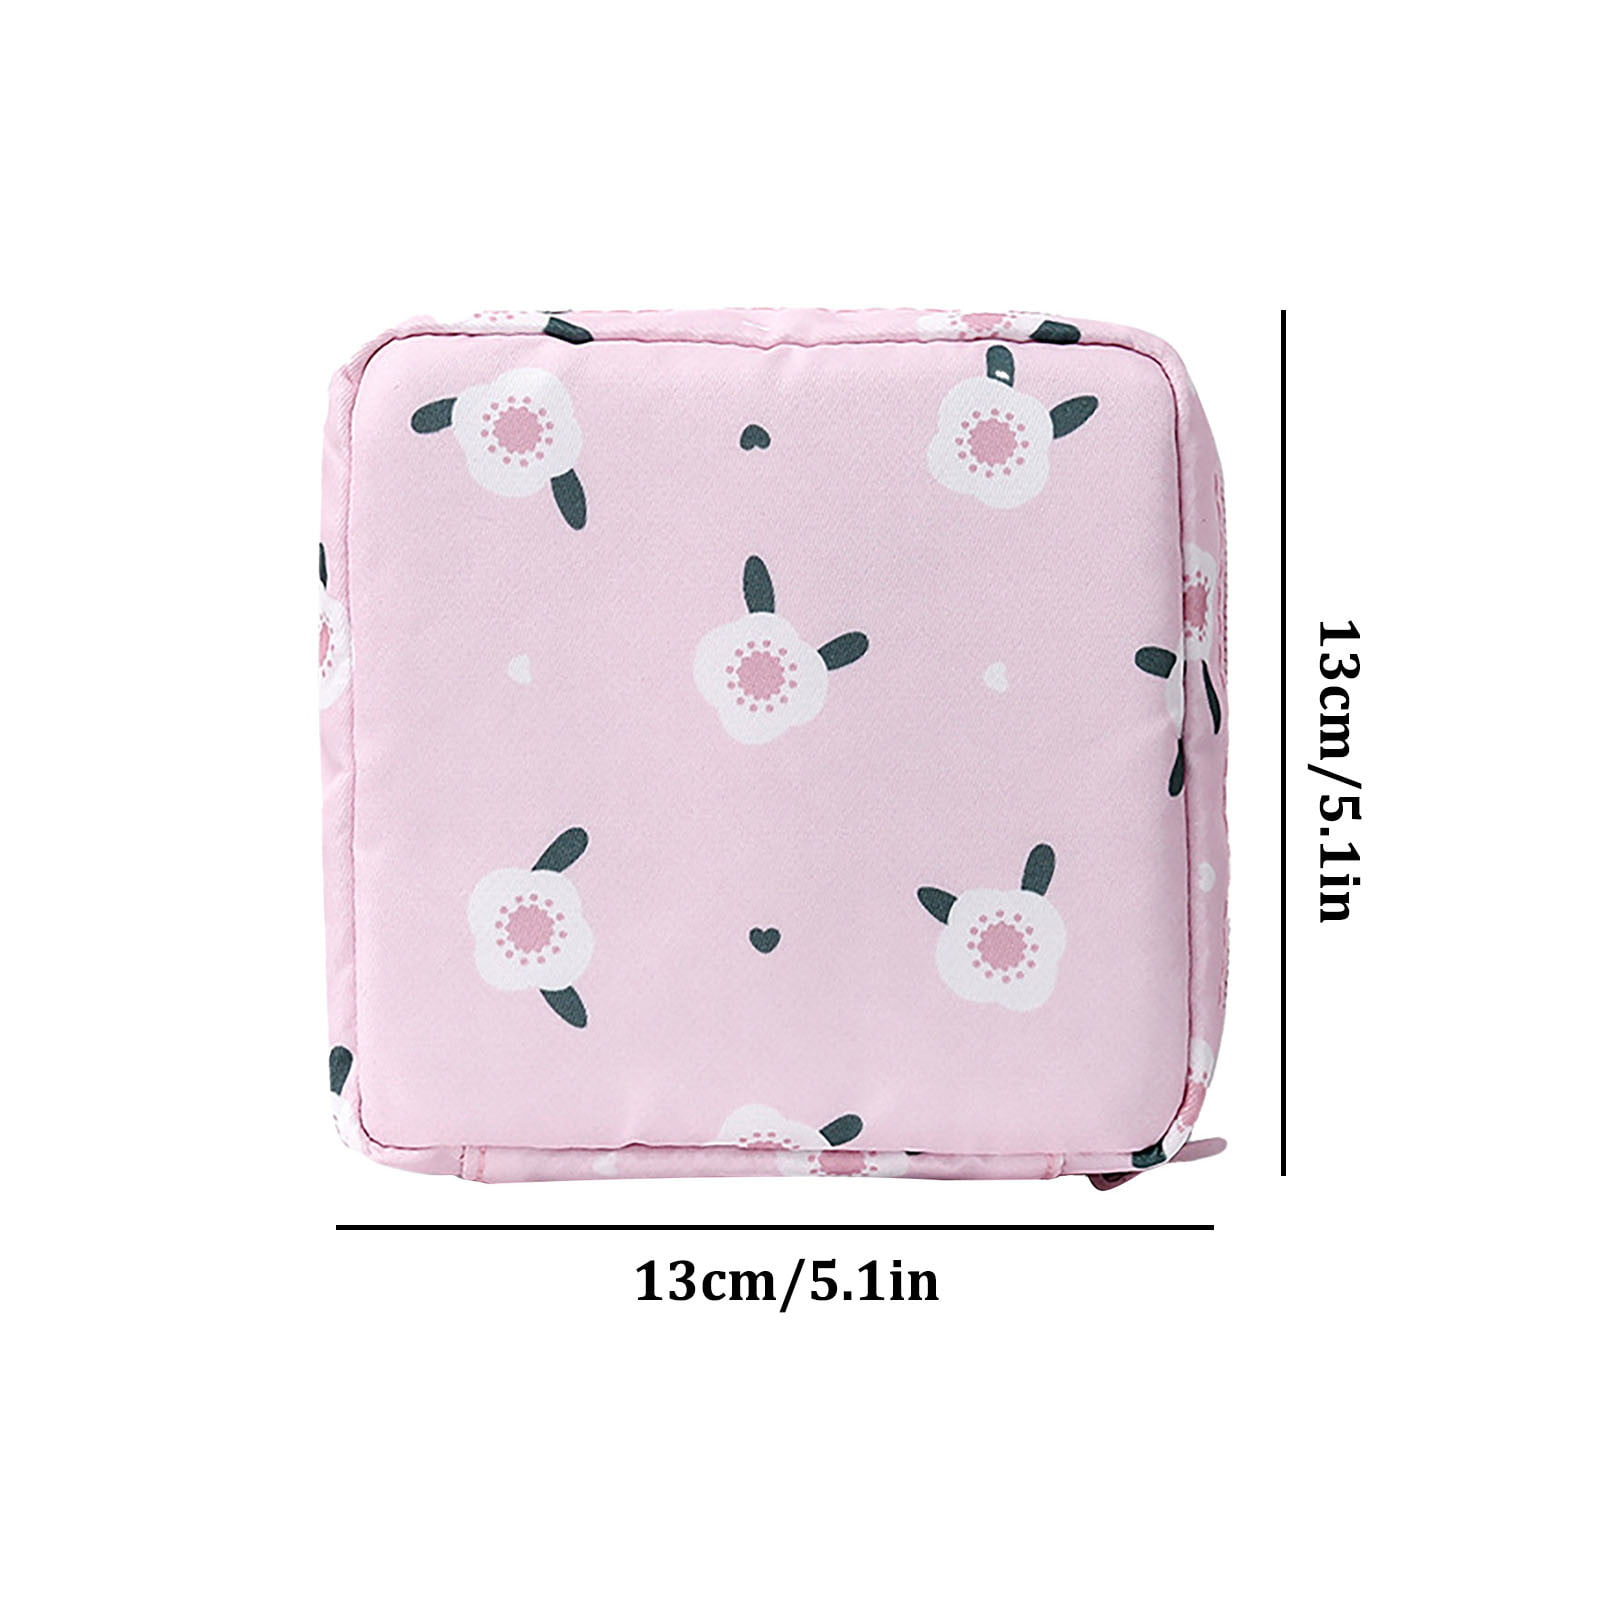  Period Pouch Portable Tampon Storage Bag,Tampon Holder for Purse  Feminine Product Organizer,pink ballet panda girl dancing : Health &  Household